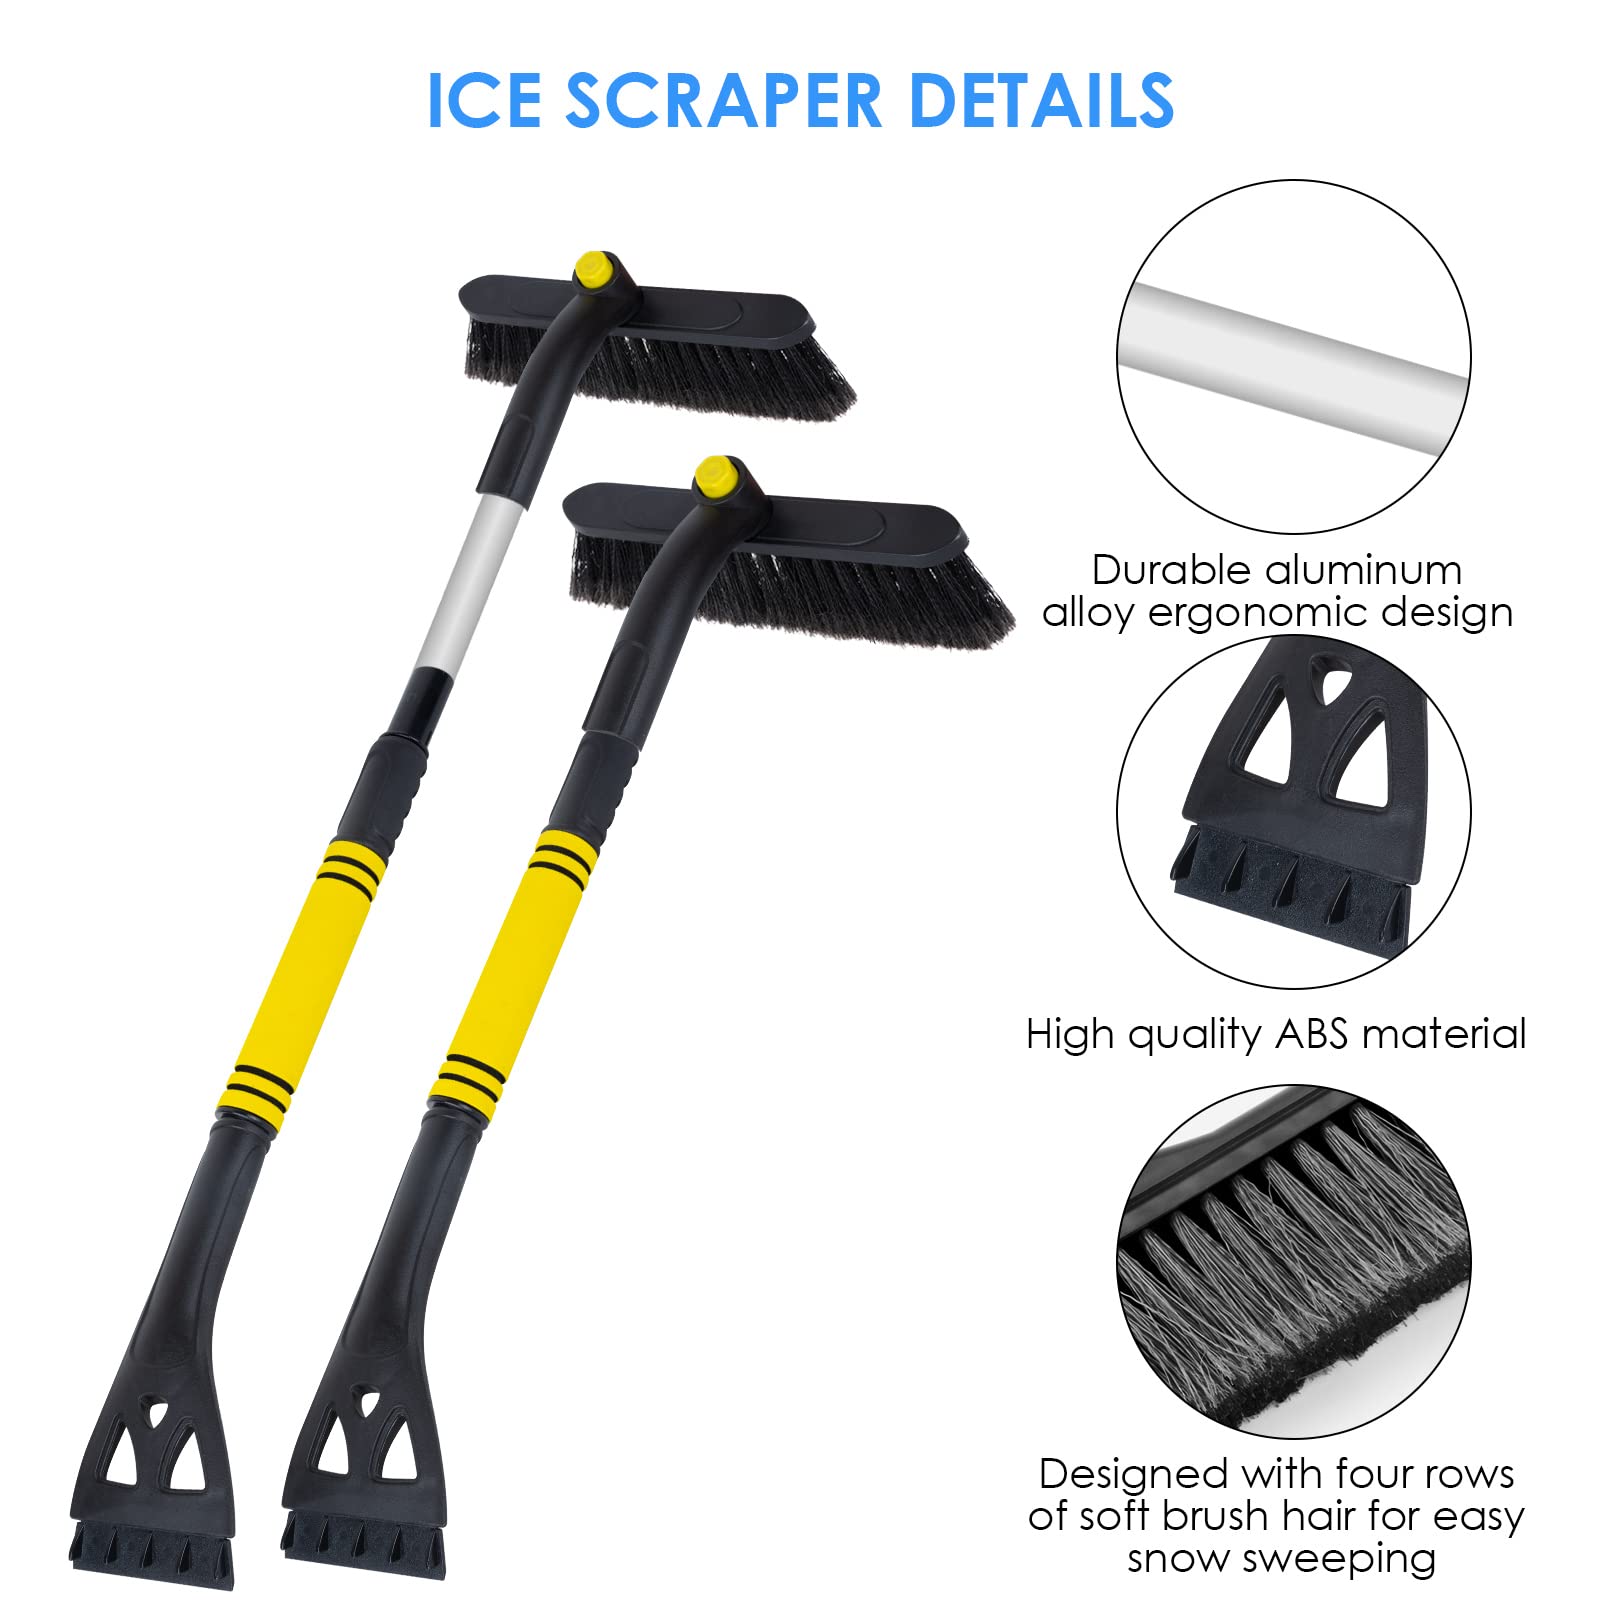 Qoosea Ice Scraper and Snow Brush for Car Windshield Extendable Snow Brush with Foam Grip and Soft Bristle Head Brush Supports 360° Degree Rotation for Car or Truck SUV Vehicle Window